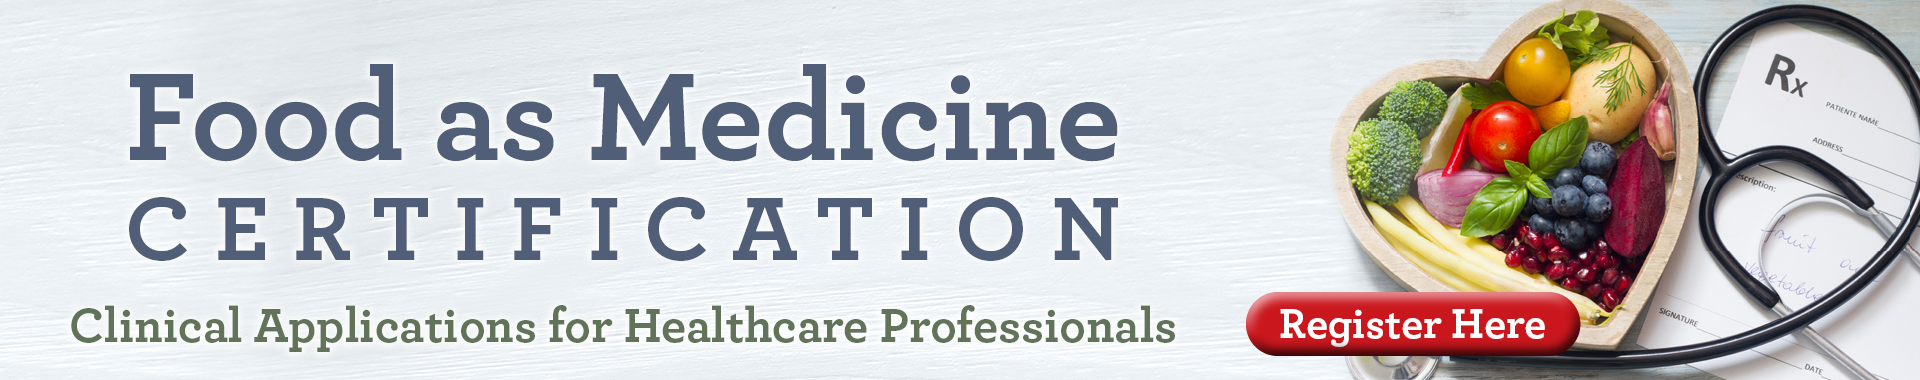 Food as Medicine Certification: Clinical Applications for Healthcare Professionals